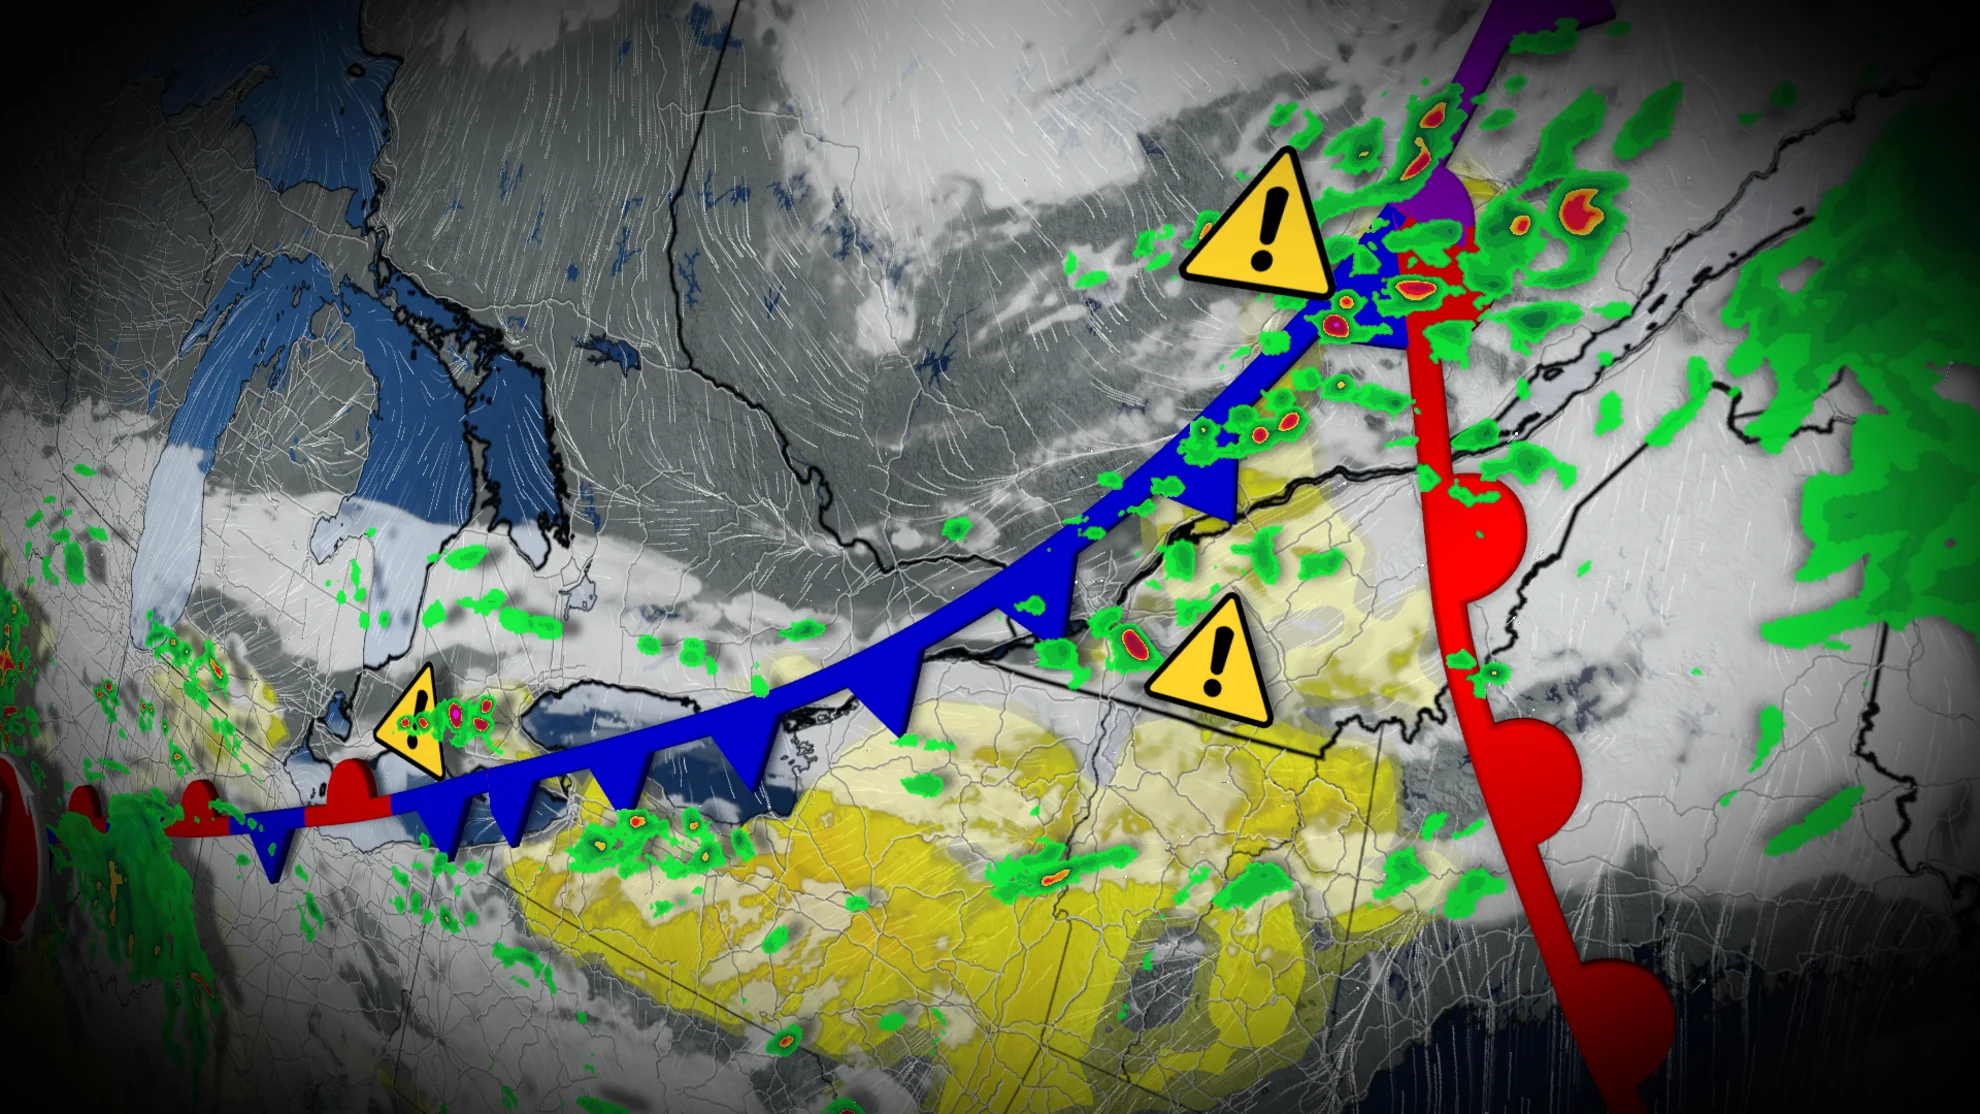 Strong thunderstorms threaten parts of southern Quebec today, as wildfire smoke spreads in from Western Canada. See what to watch for, here